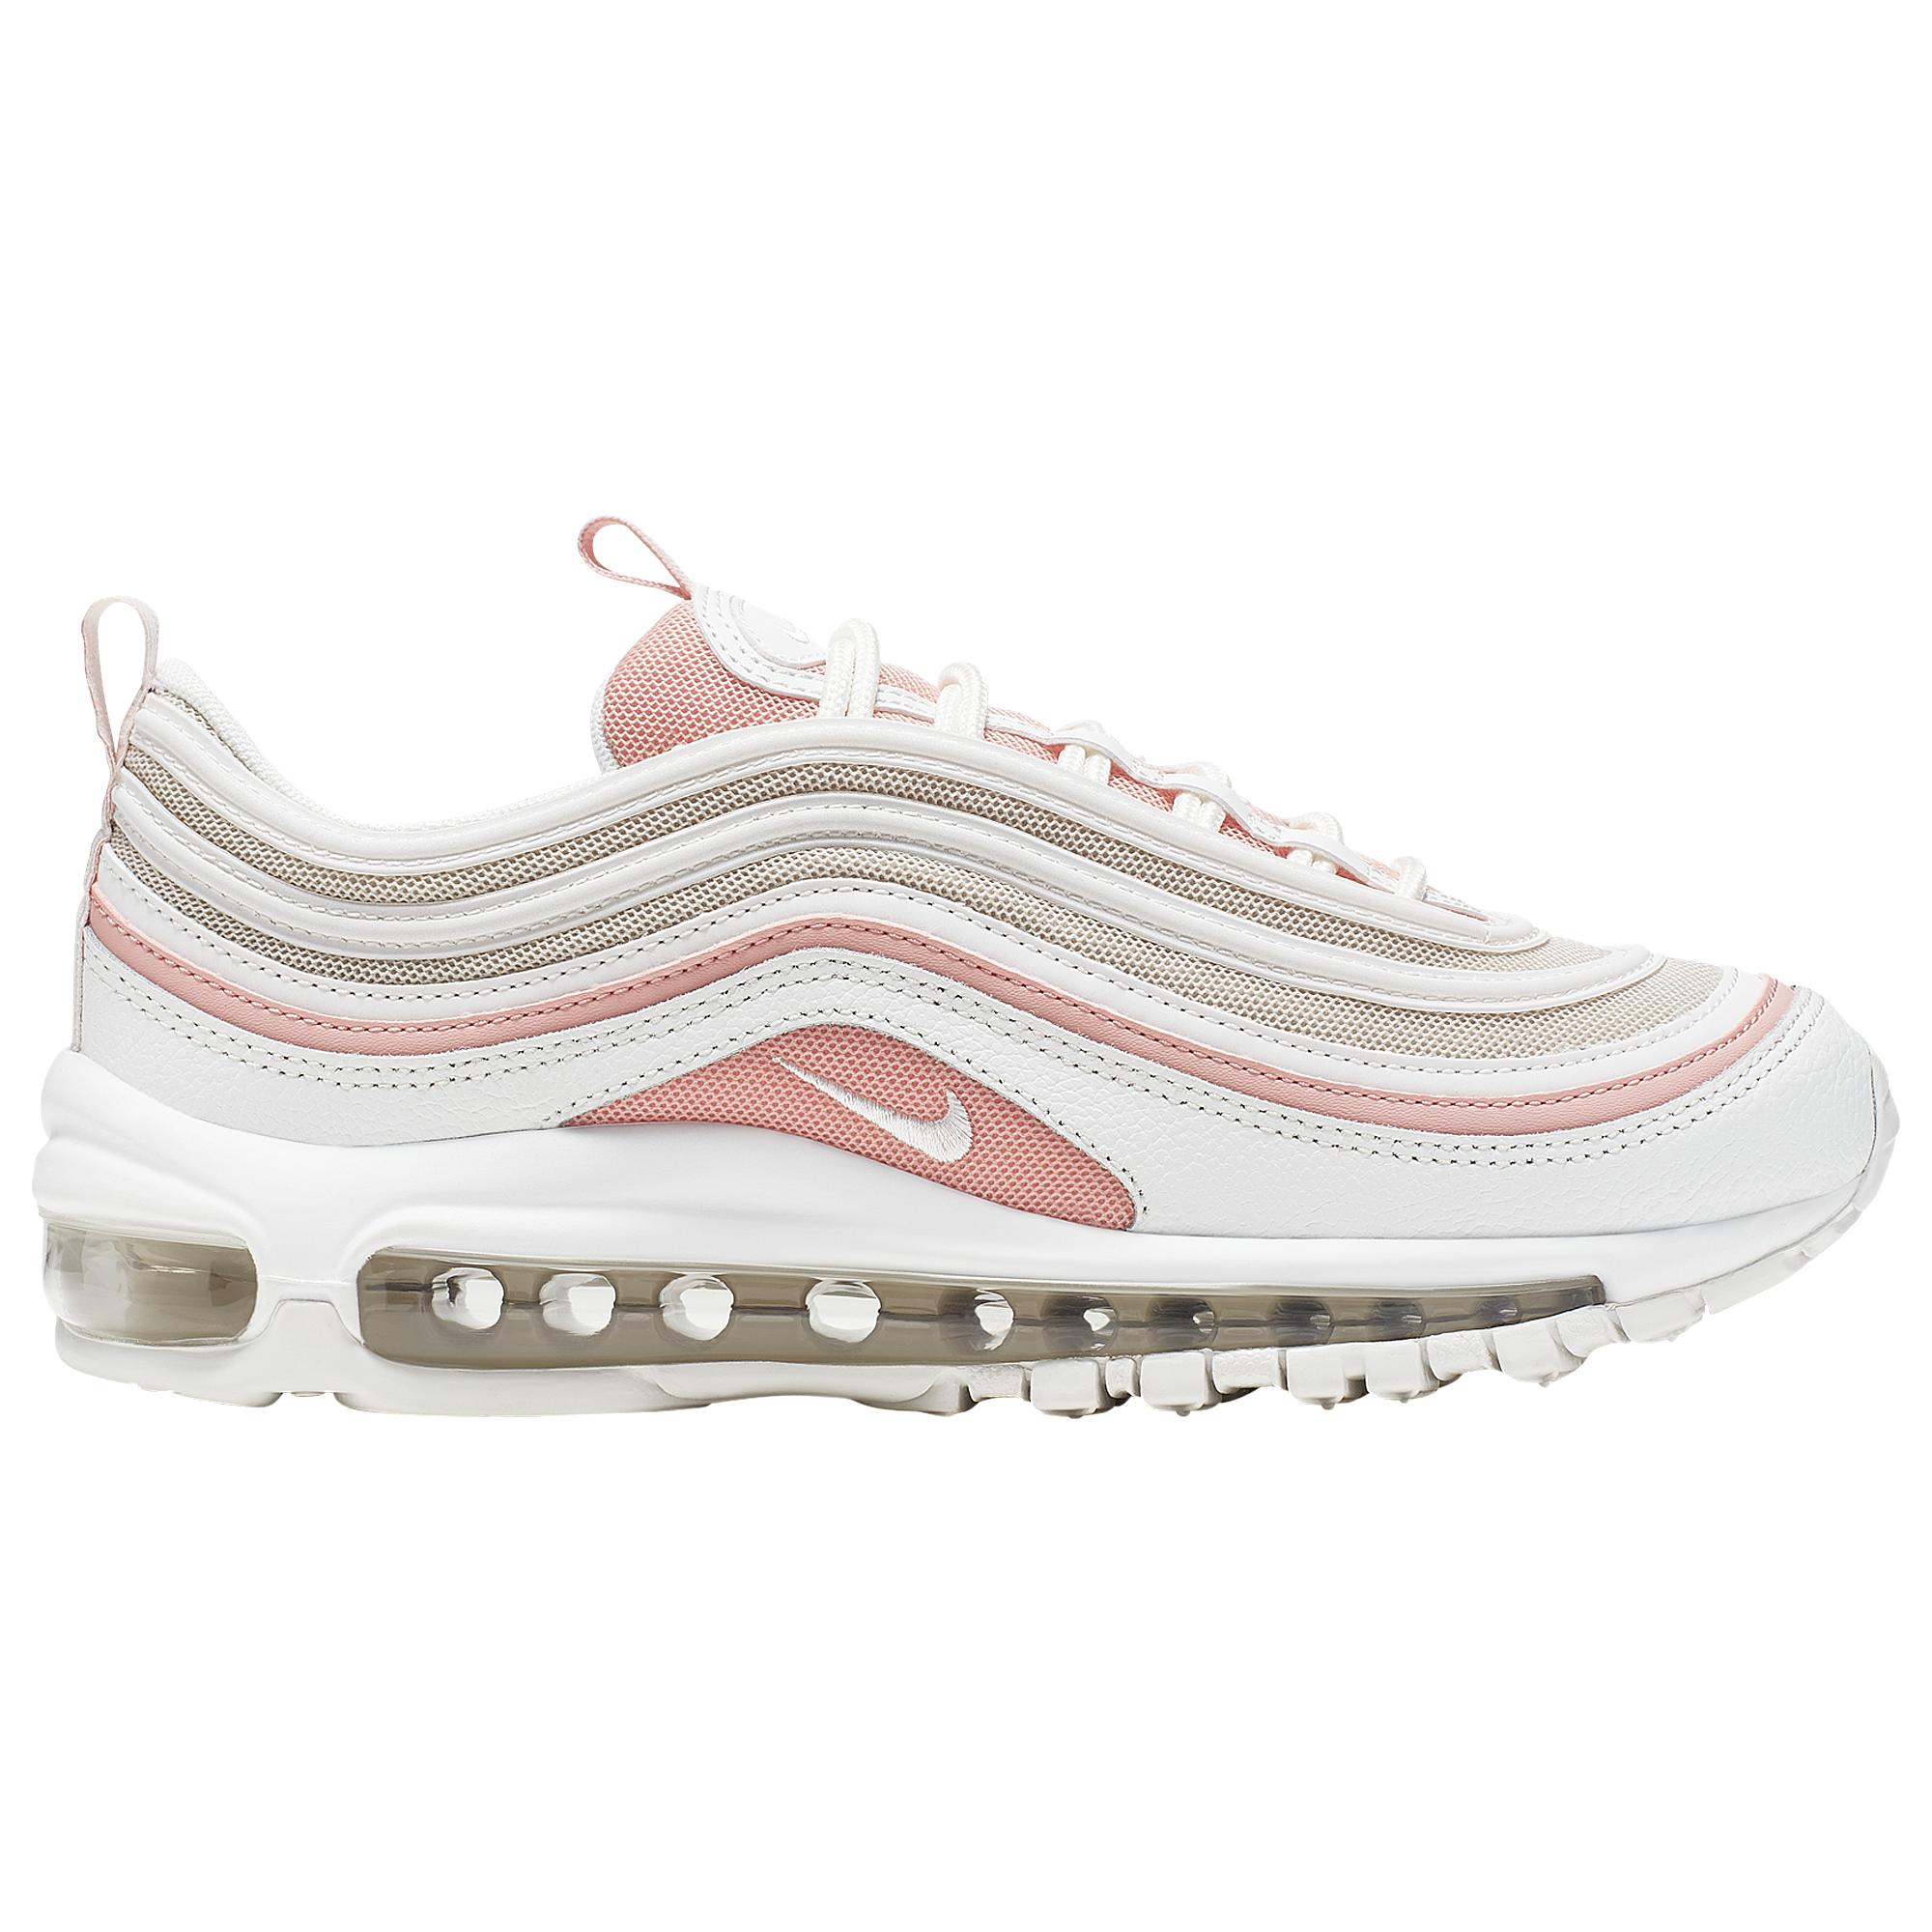 Nike Rubber Air Max 97 Running Shoes in 